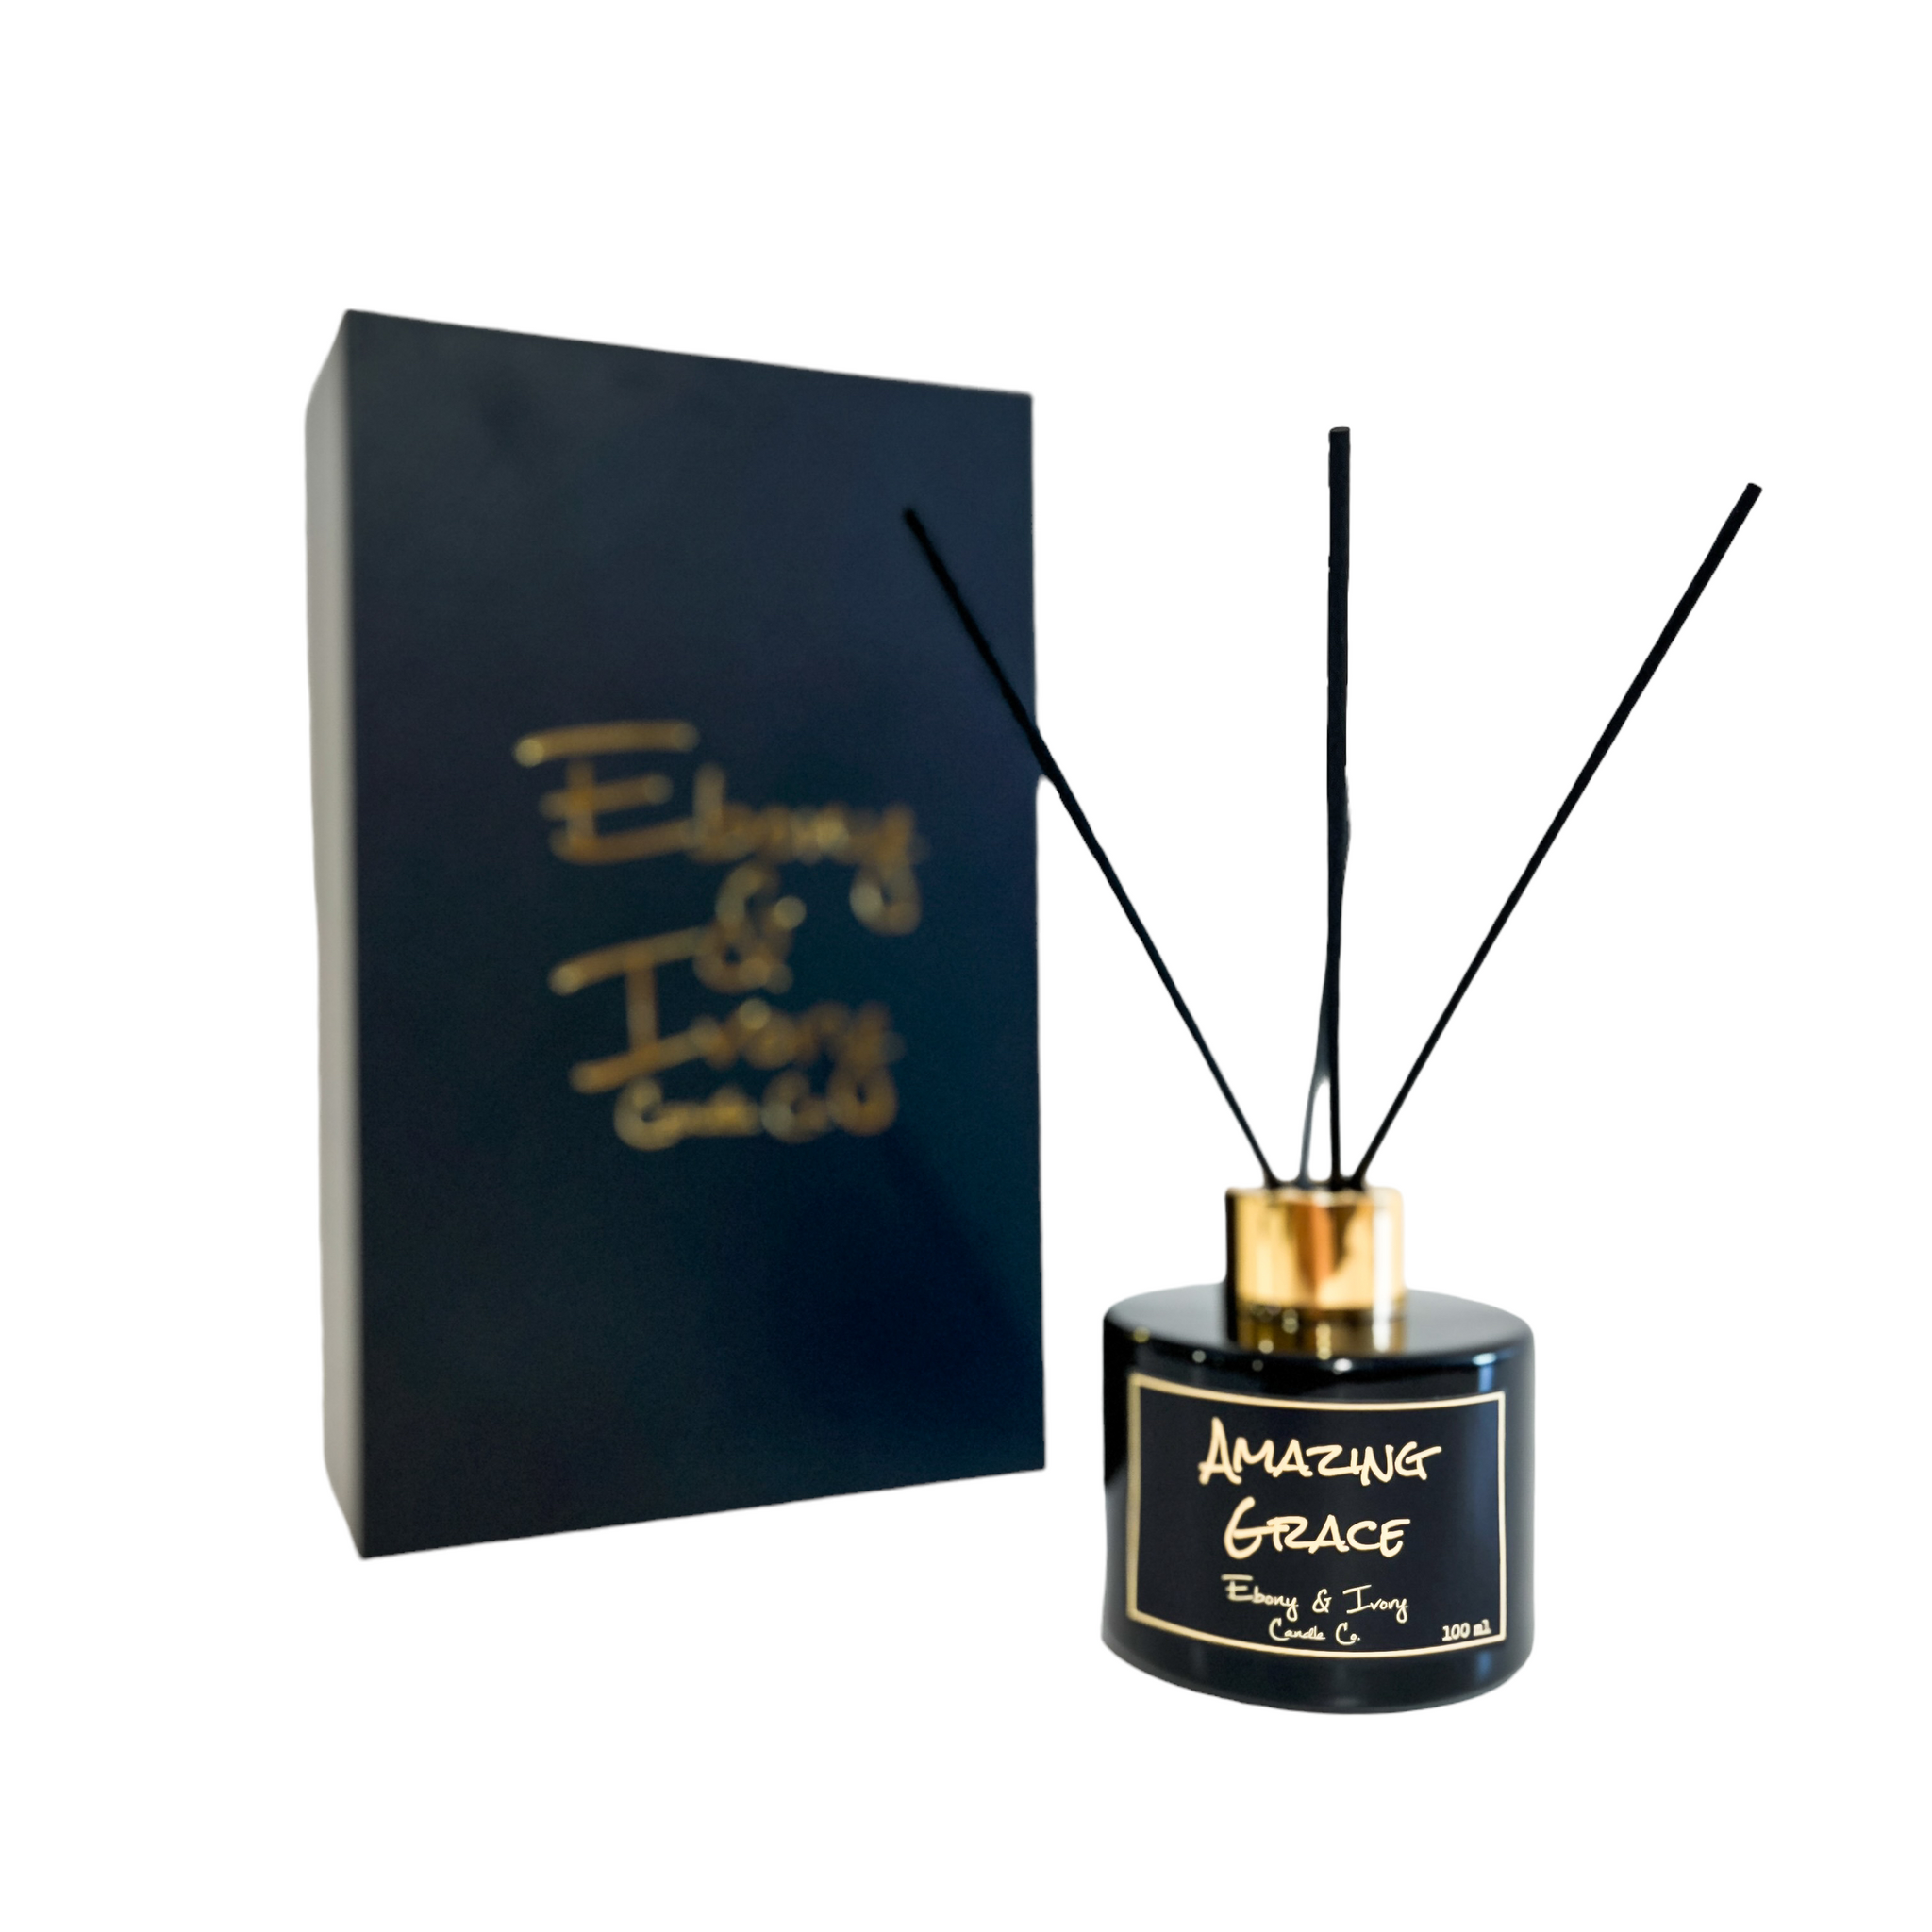 black one hundred milliliter, lavender, cedar, and cardamom scented reed diffuser with a gold lid and a black label that reads Amazing Grace